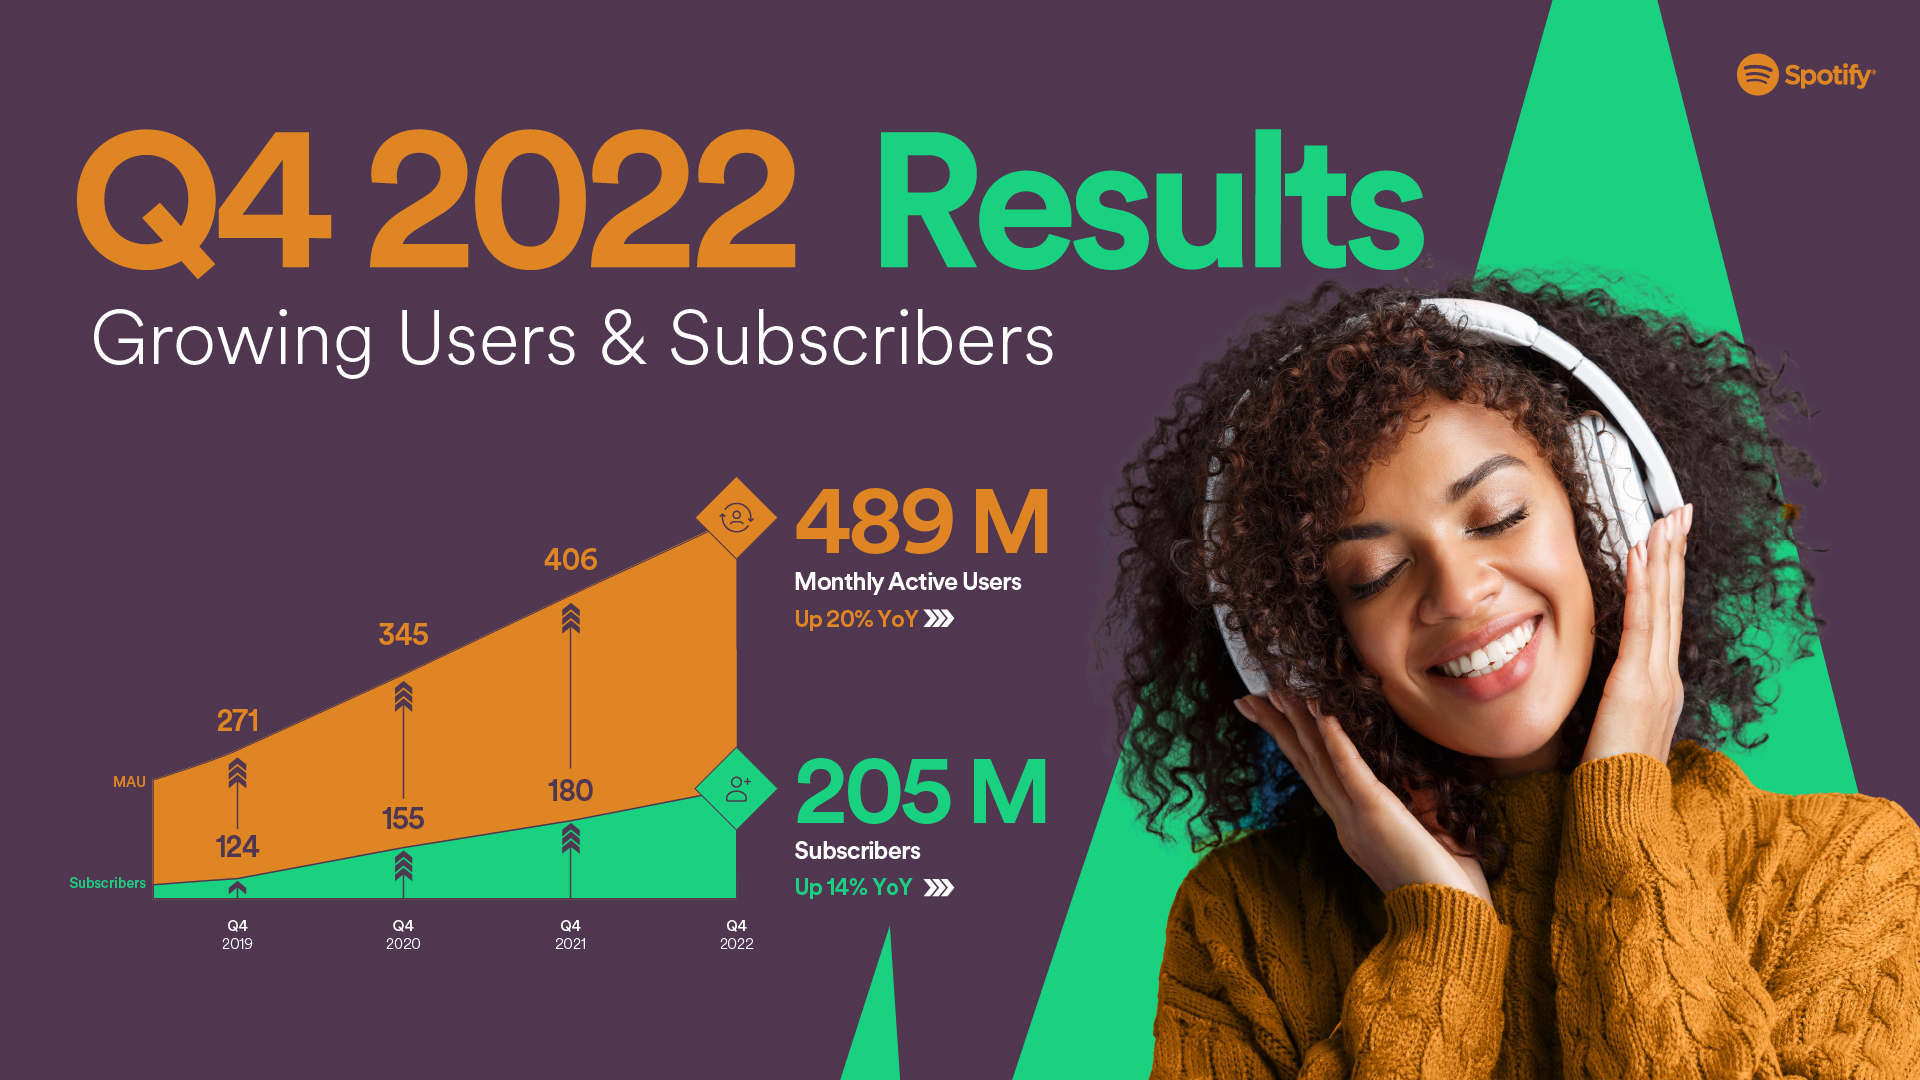 Spotify Q4 2022 Results – Spotify update their user and subscriber numbers